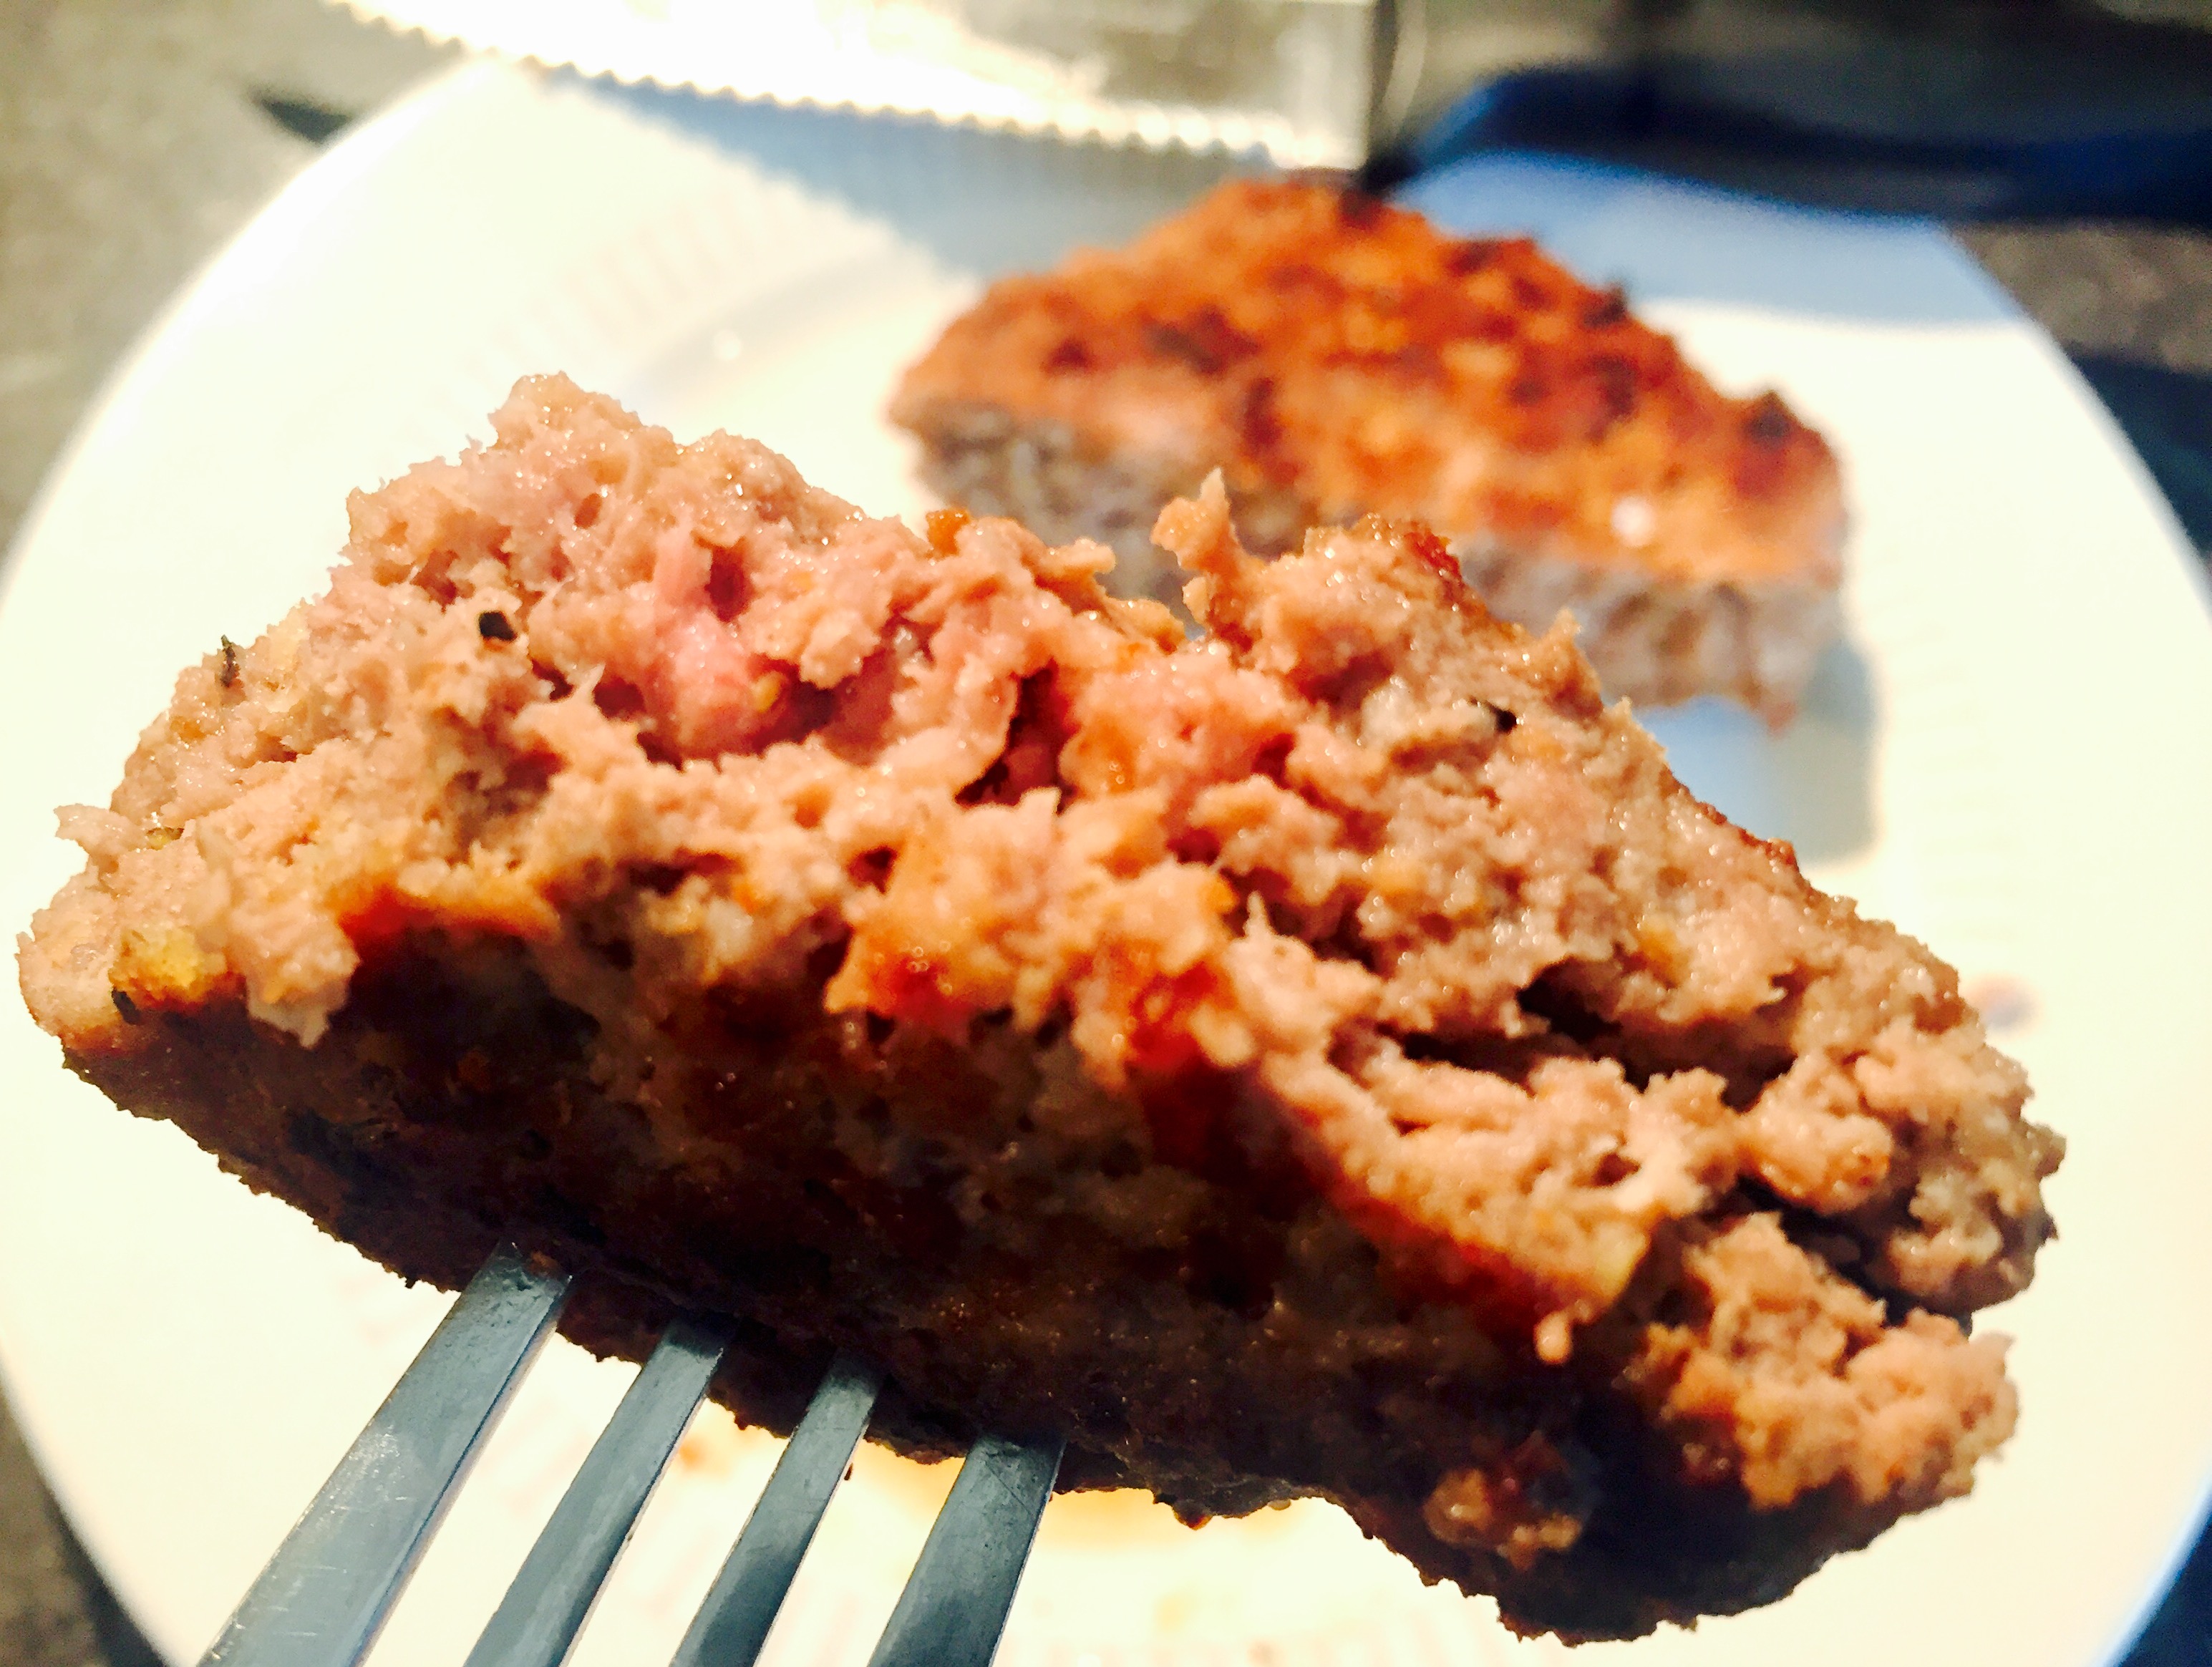 One bite of these succulent homemade organic gluten free burgers and you'll never want to eat another frozen hamburger again!